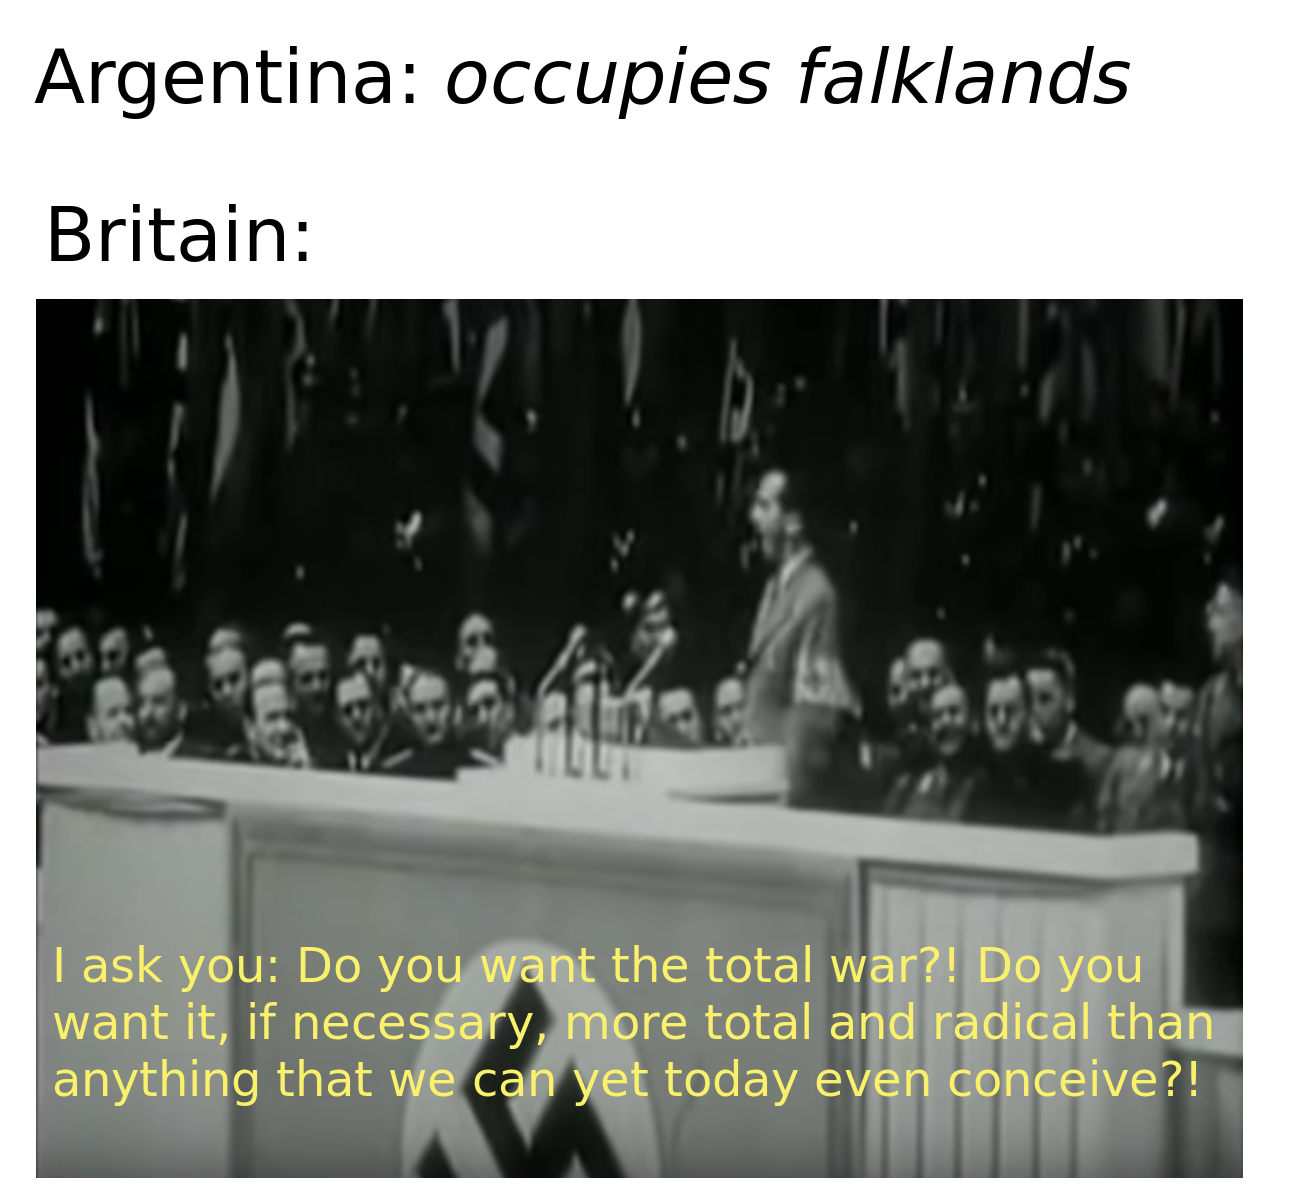 What would you do to keep the Falklands ?